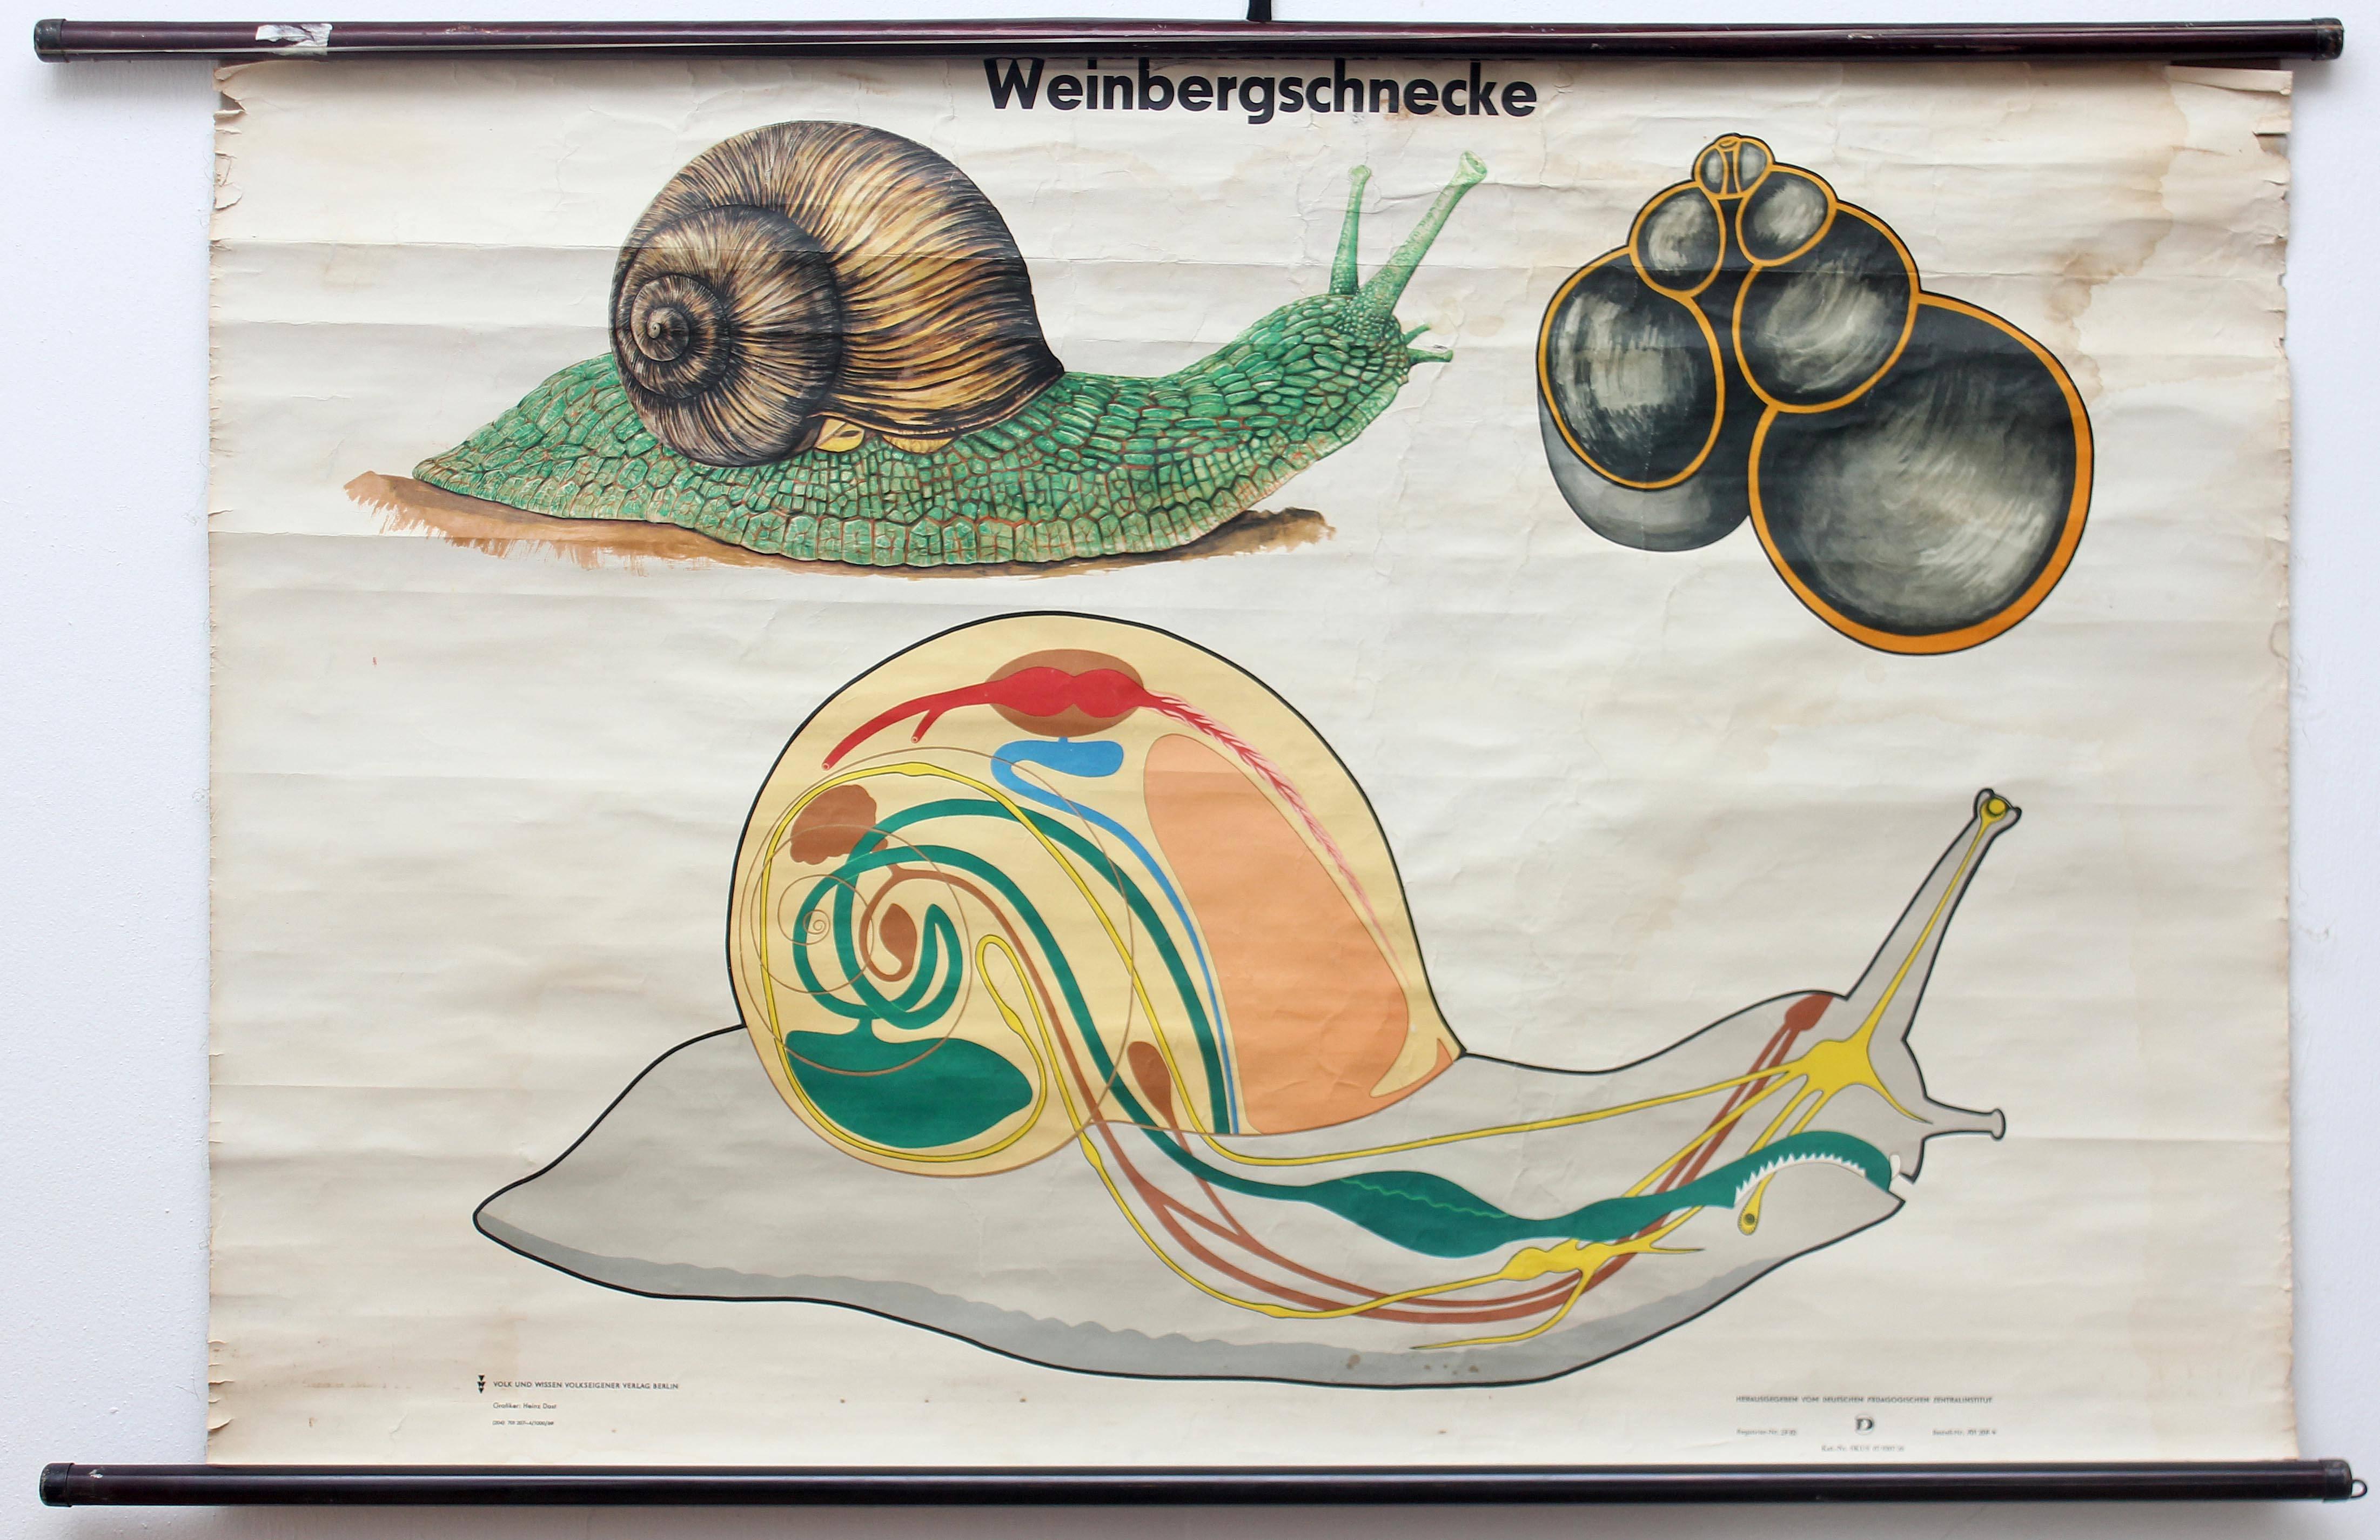 Vintage school anatomy poster print. Made in Germany. Paper mounted on linen. Unframed, hung in scroll form. Very colorful. 